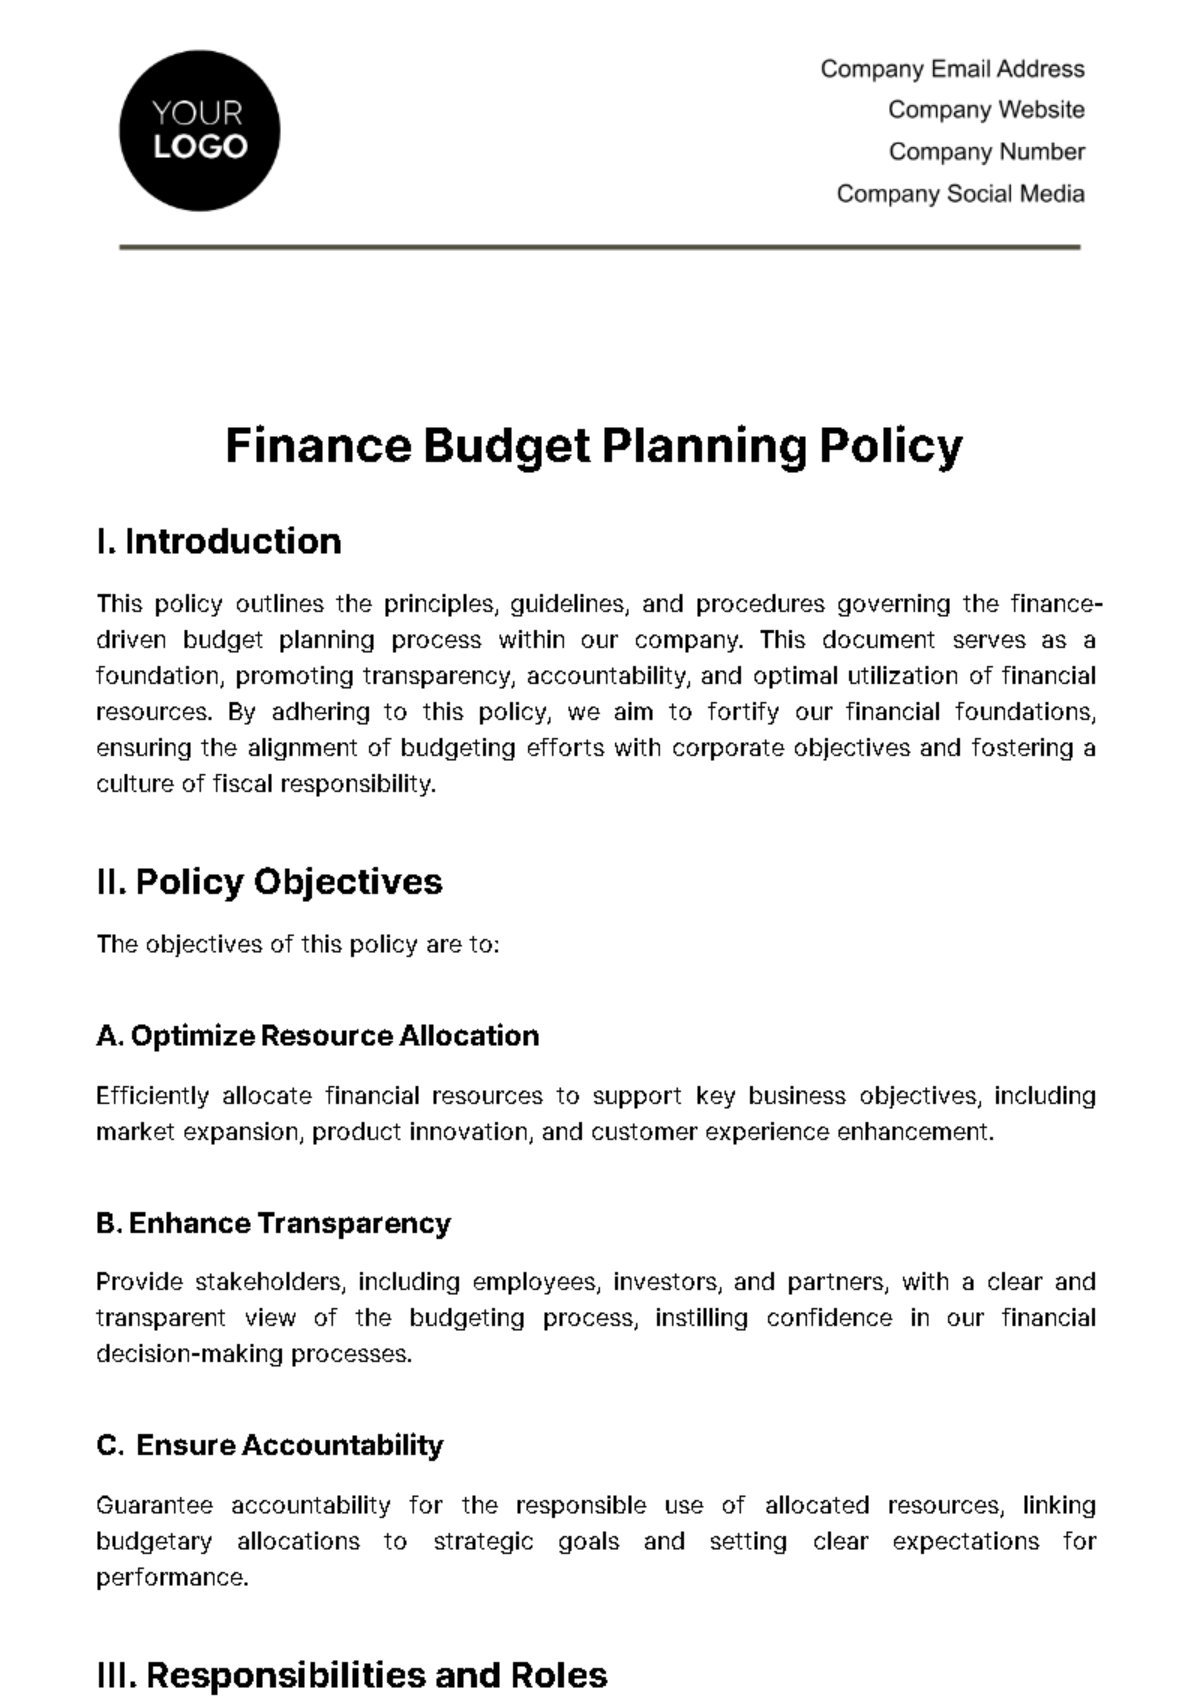 Free Finance Budget Planning Policy Template